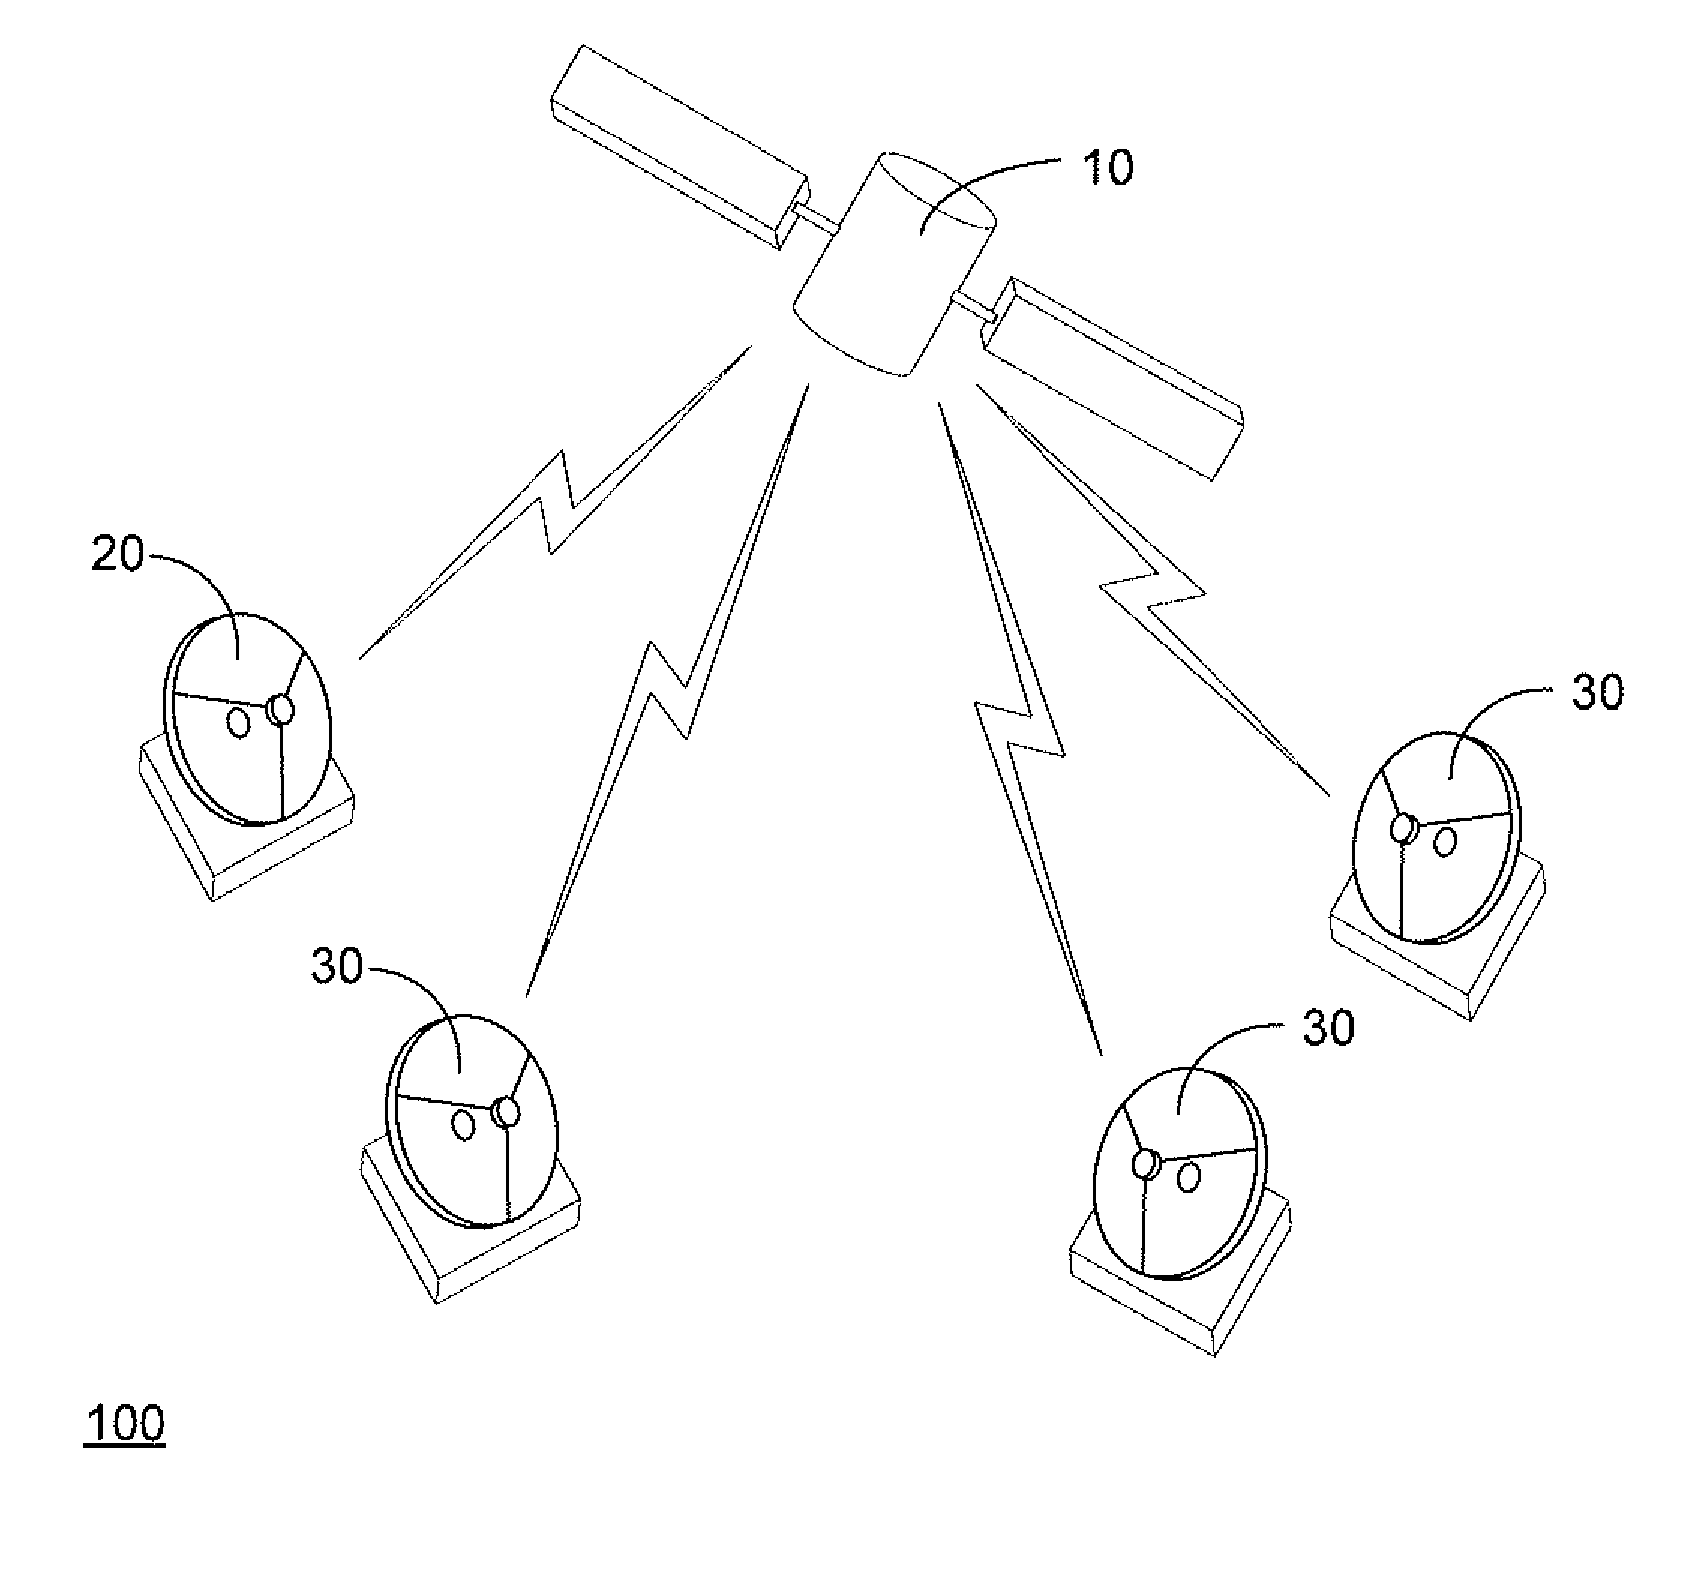 System and method of doppler and local oscillator compensation in a TDMA system